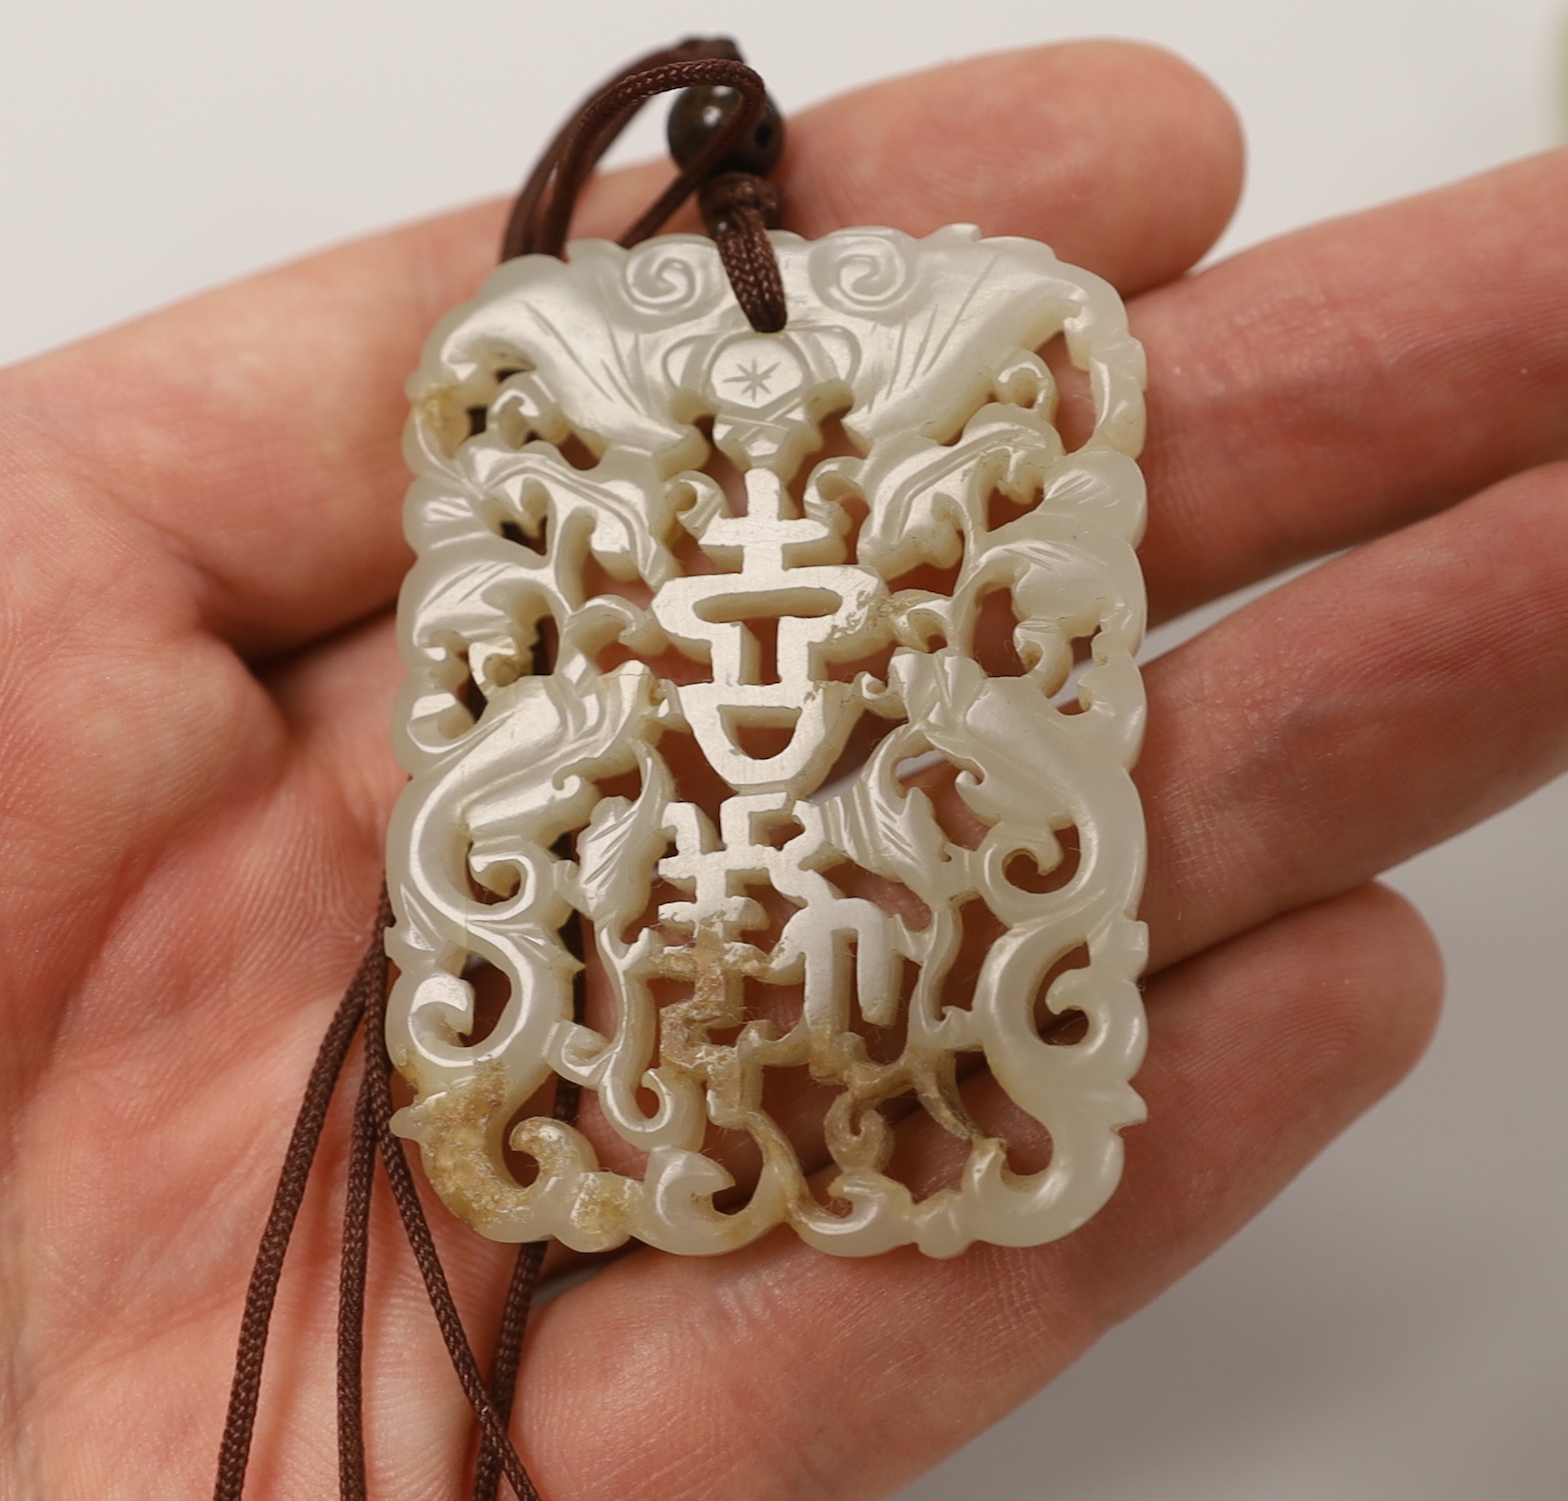 A Chinese pale celadon jade belt hook, 18th / 19th century and a similar 19th century pendant, pendant 5.5 cm long